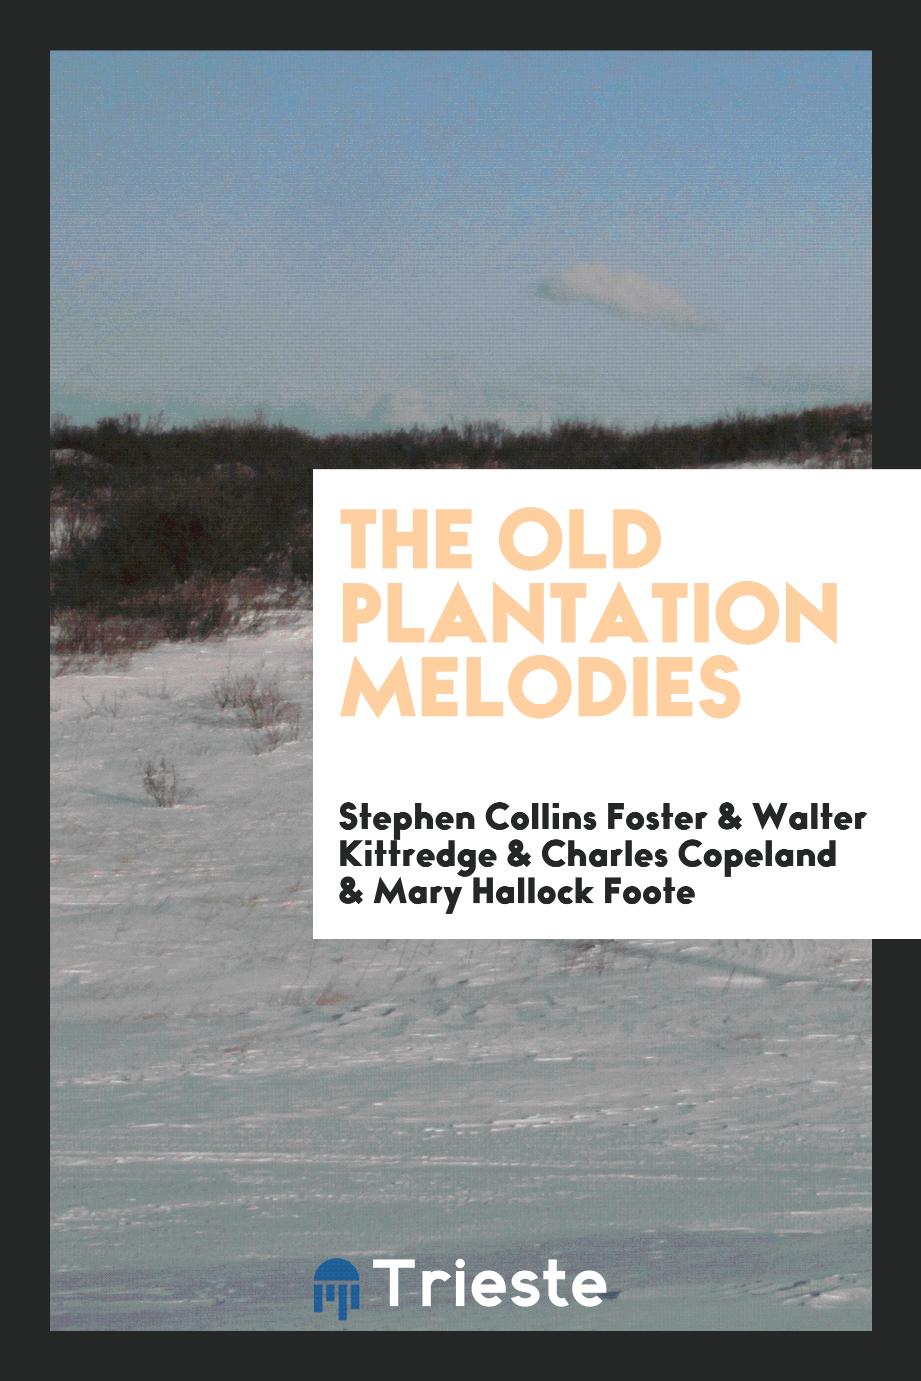 The old plantation melodies